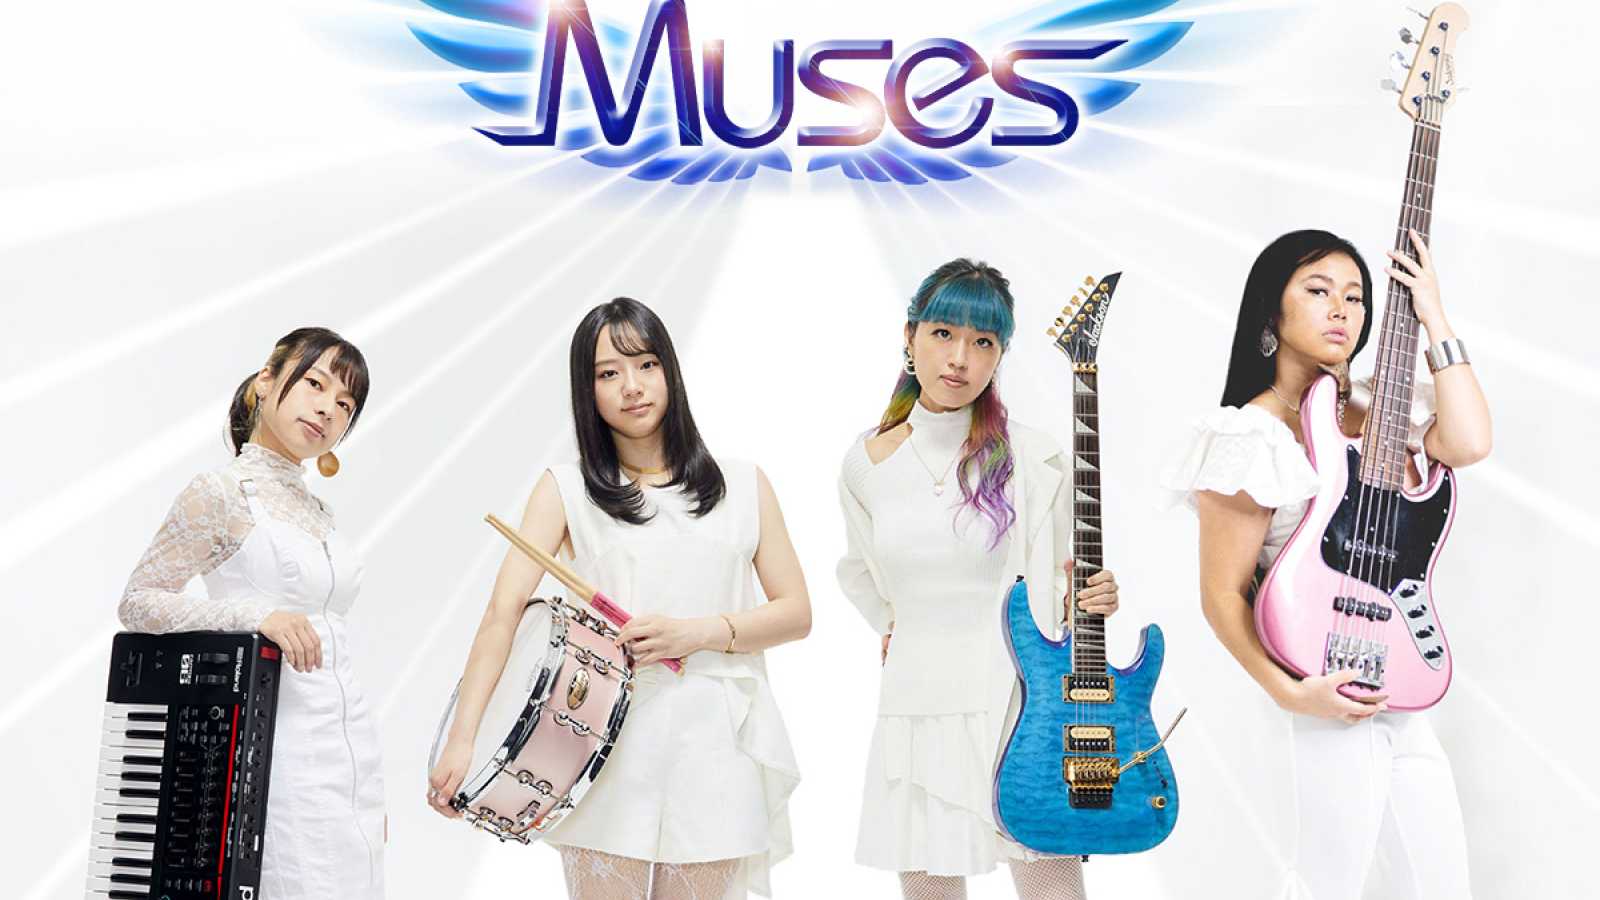 New Band: Muses © Poppin Records. All rights reserved.